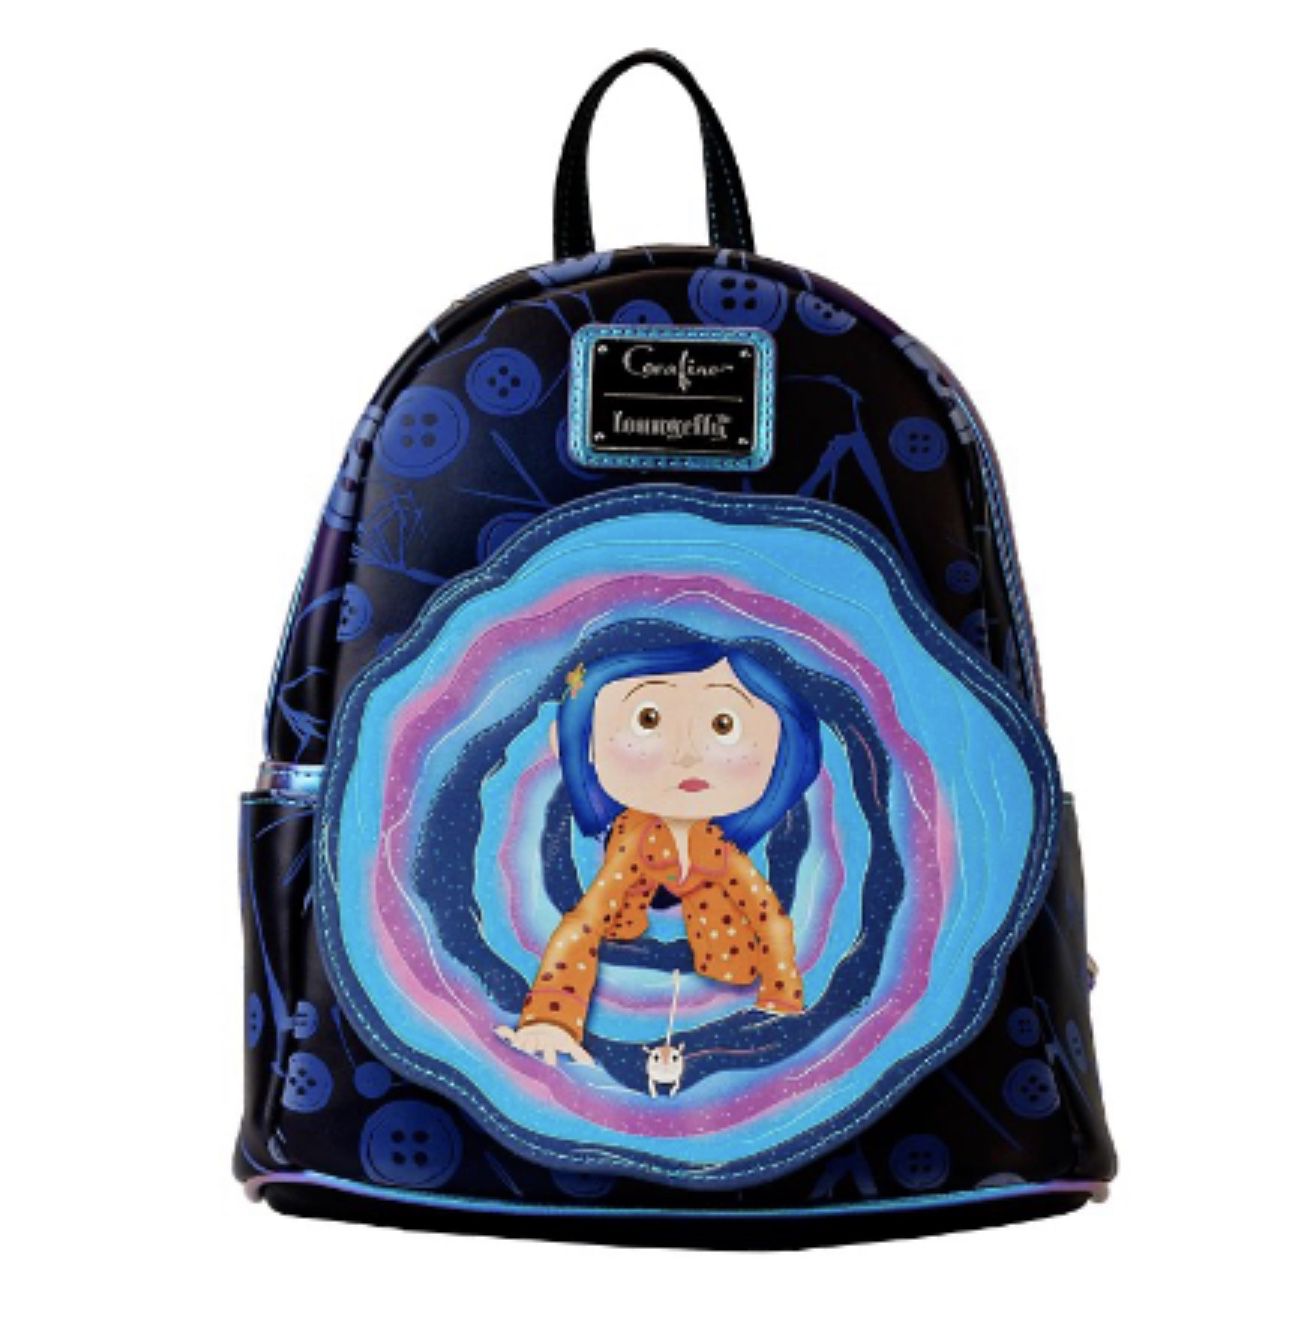 Loungefly Coraline Mini Backpack for Sale in Queens, NY - OfferUp